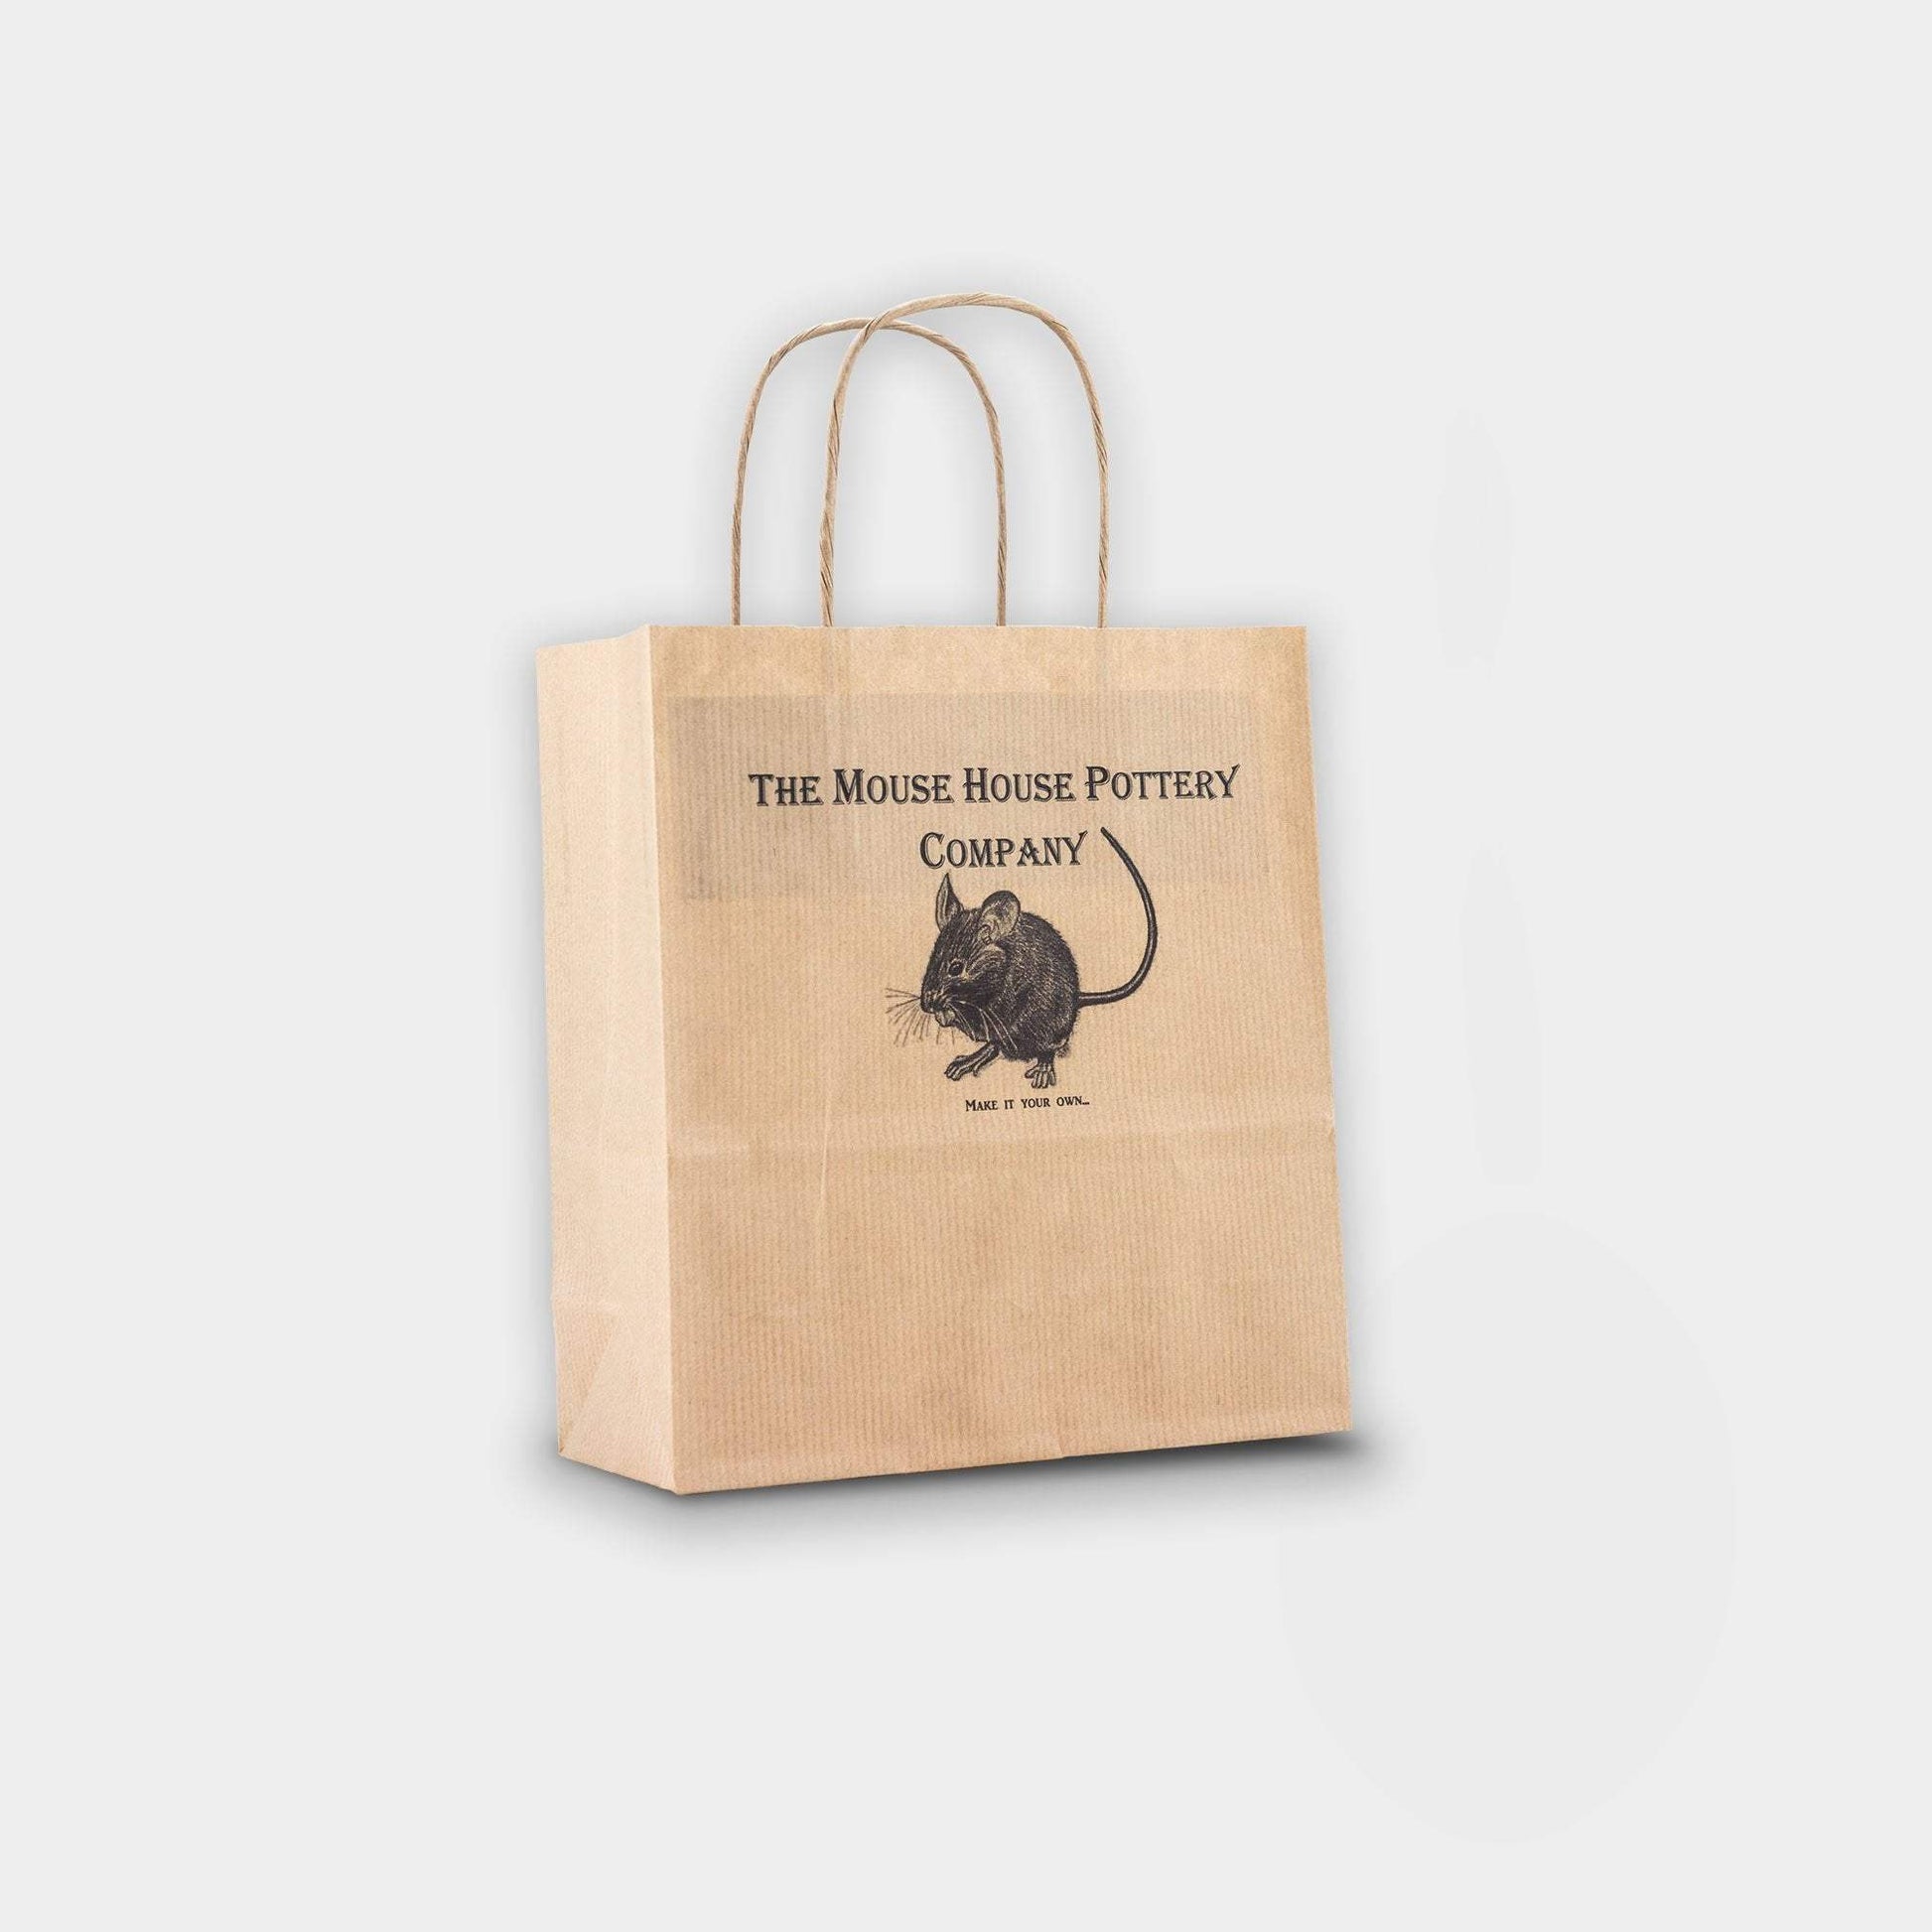 Mini Kraft Paper Bag Full Colour Print - Promotions Only Group Limited